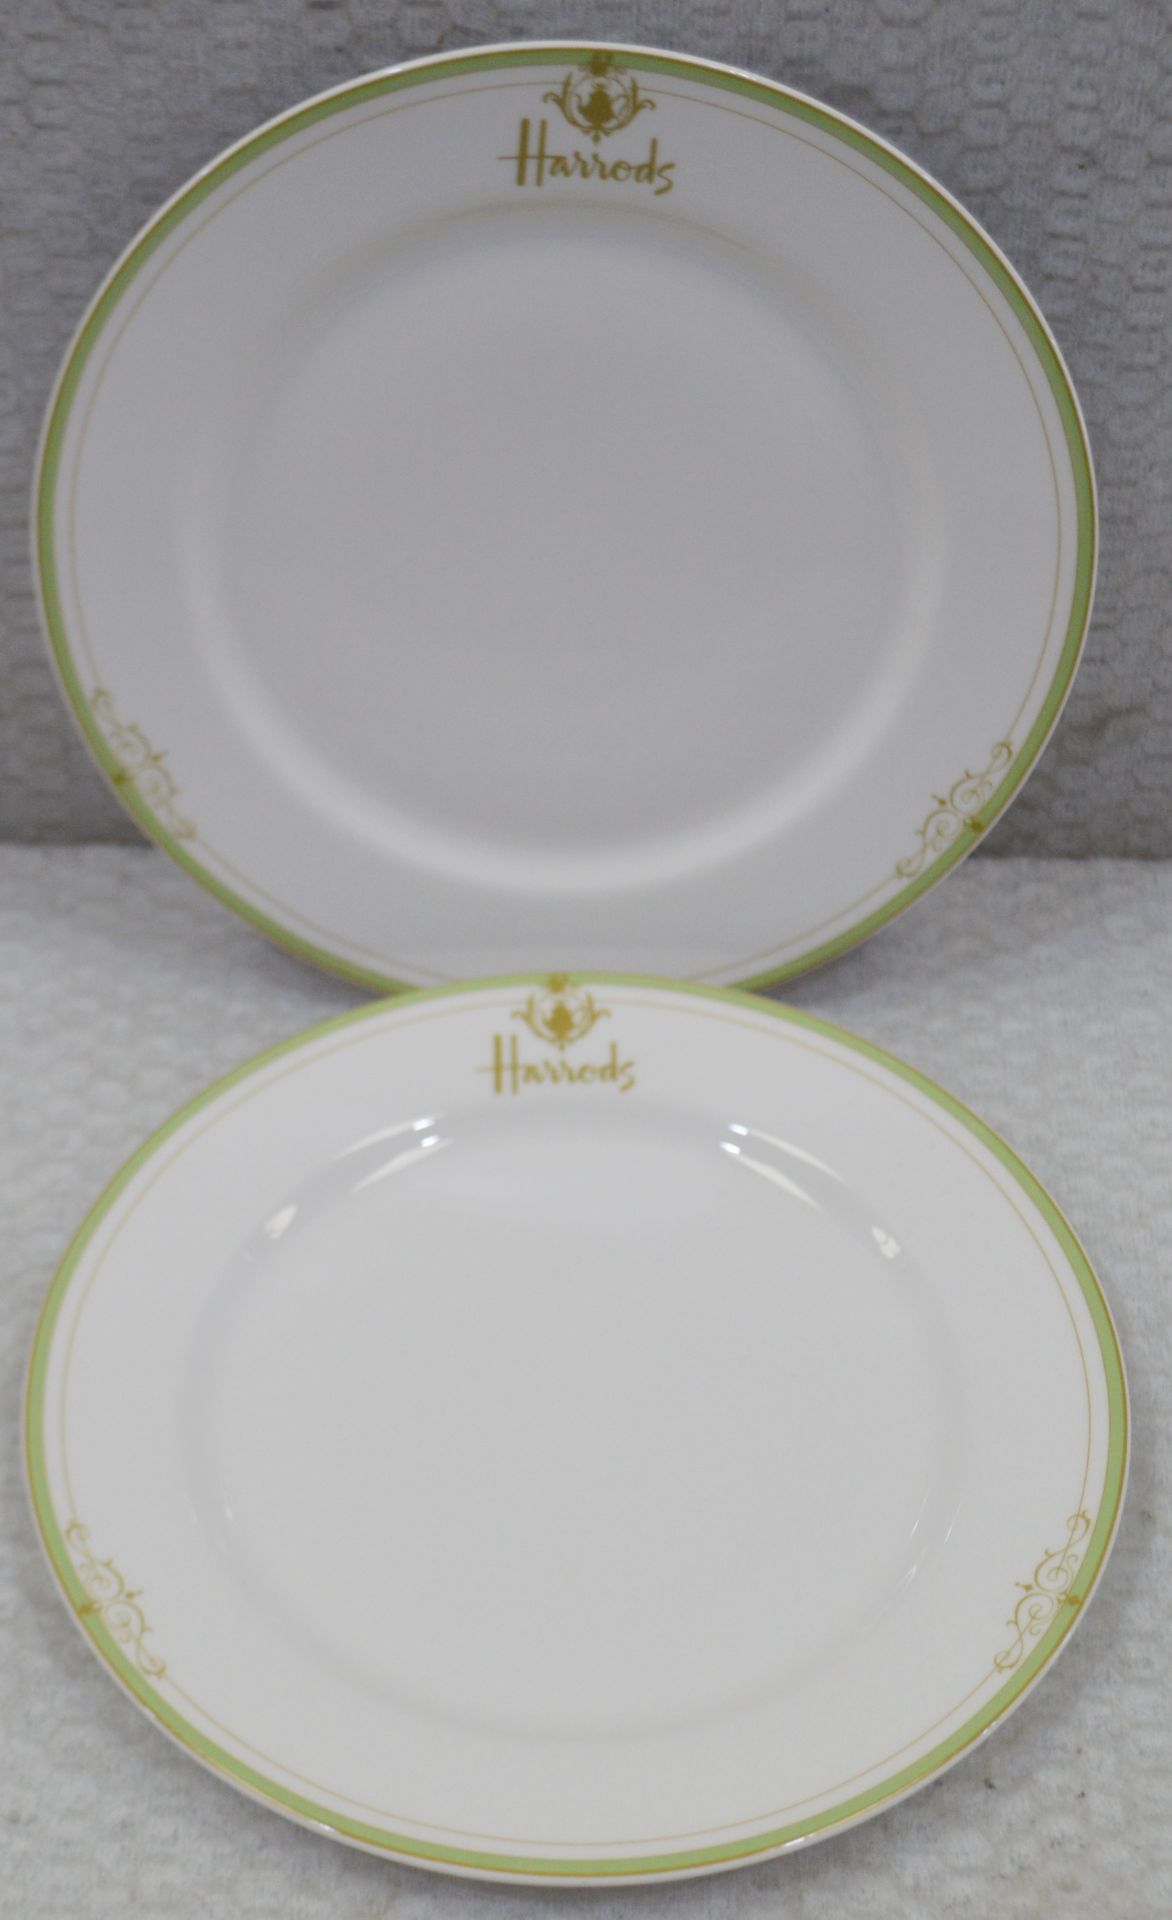 24 x Harrods Two Colour Litho Georgian Plates - Dimensions: 8 inches - Recently Removed From a - Image 2 of 2